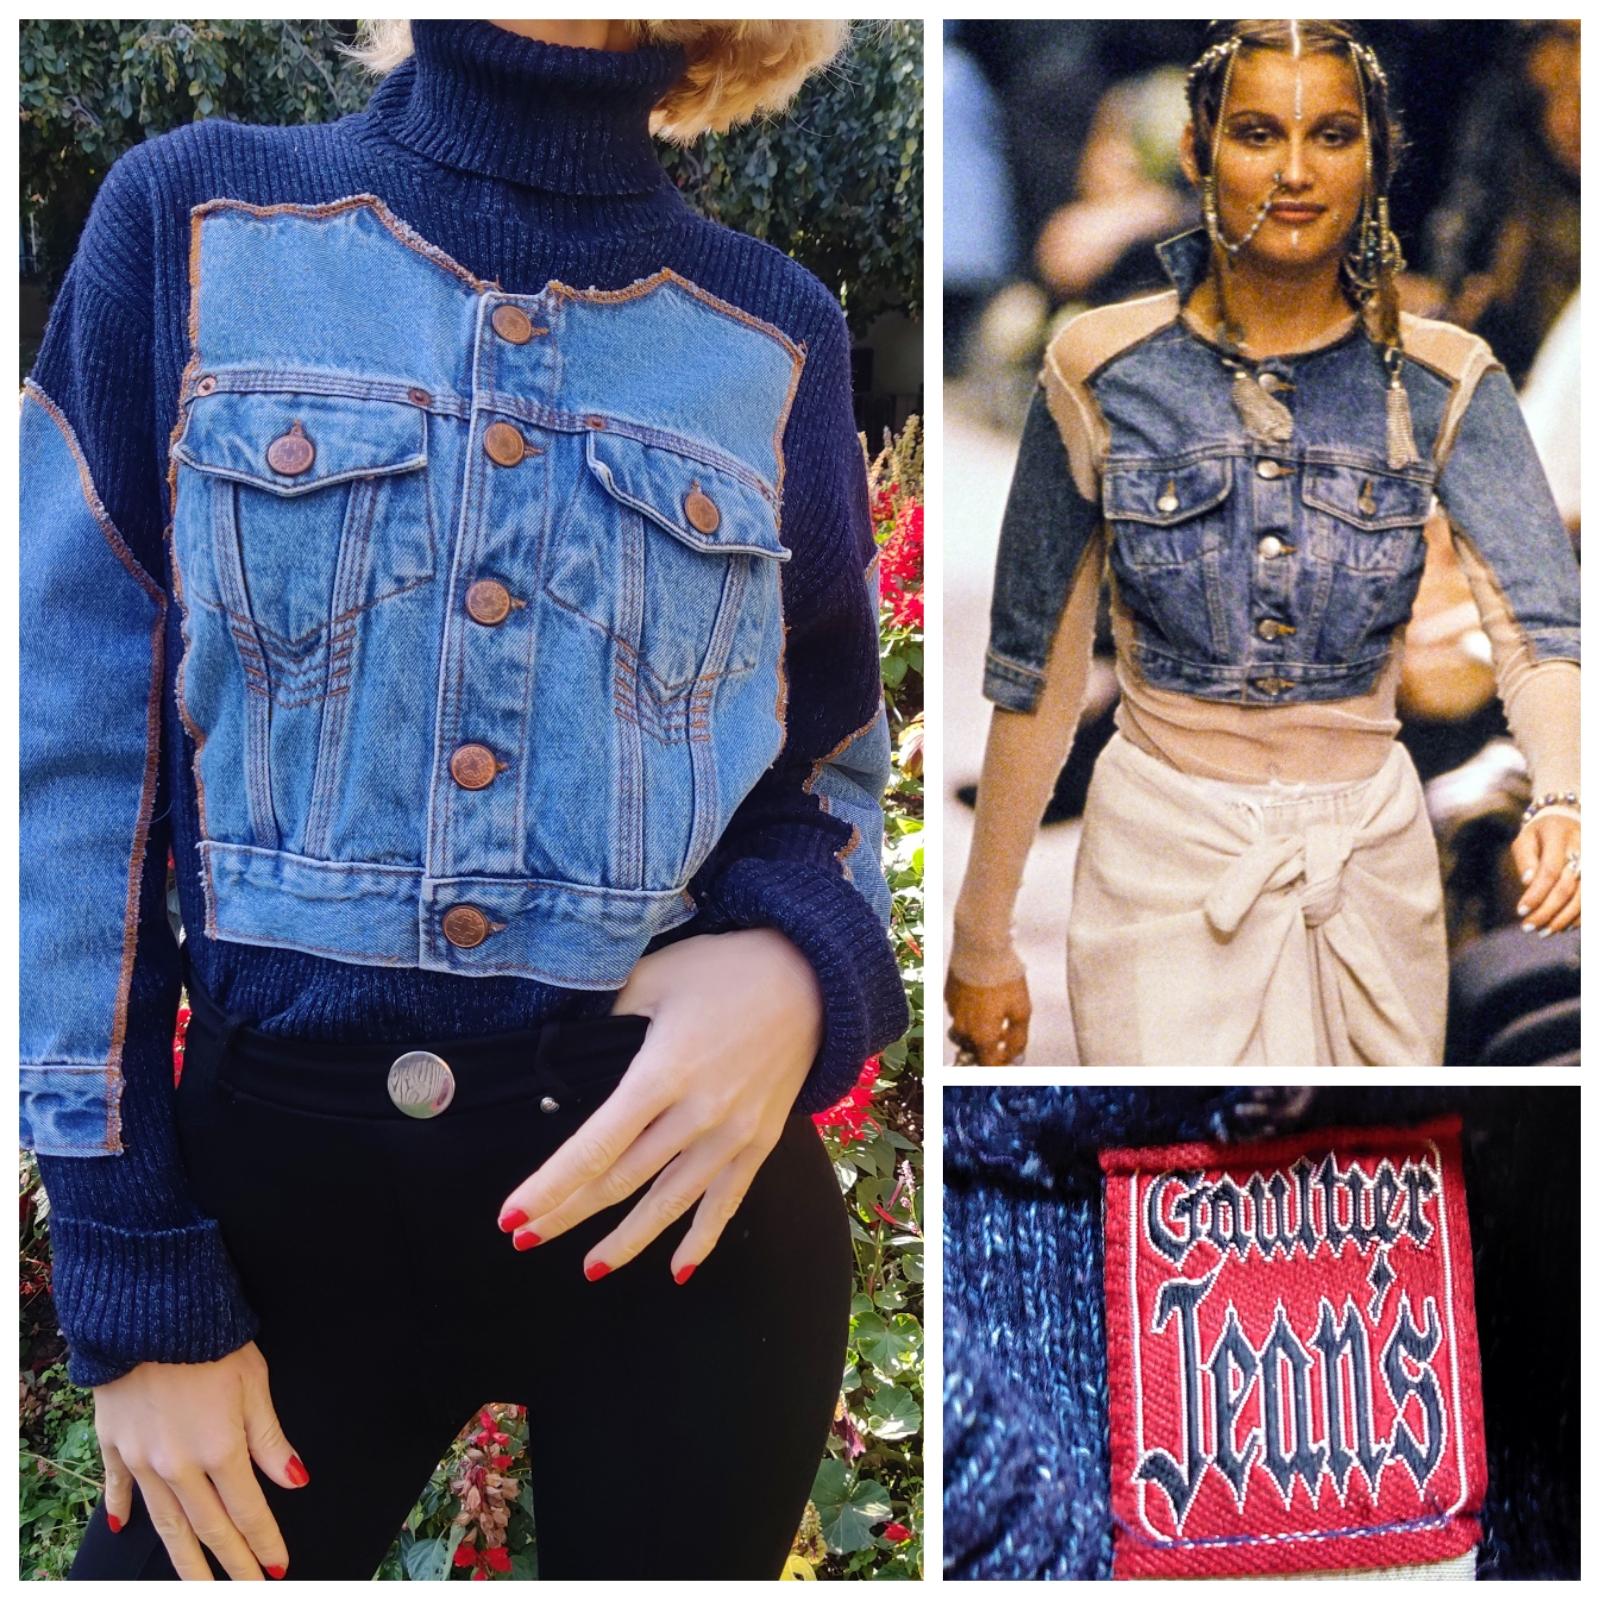 Optical Illusion jacket / pullover by Jean Paul Gaultier! From the iconic 1994 Summer Spring Les Tatouages collection.
Laetitia Casta supermodel worn it on the runway in 1994 and again in 2020, Paris.

It looks like a denim jacket, but it is a